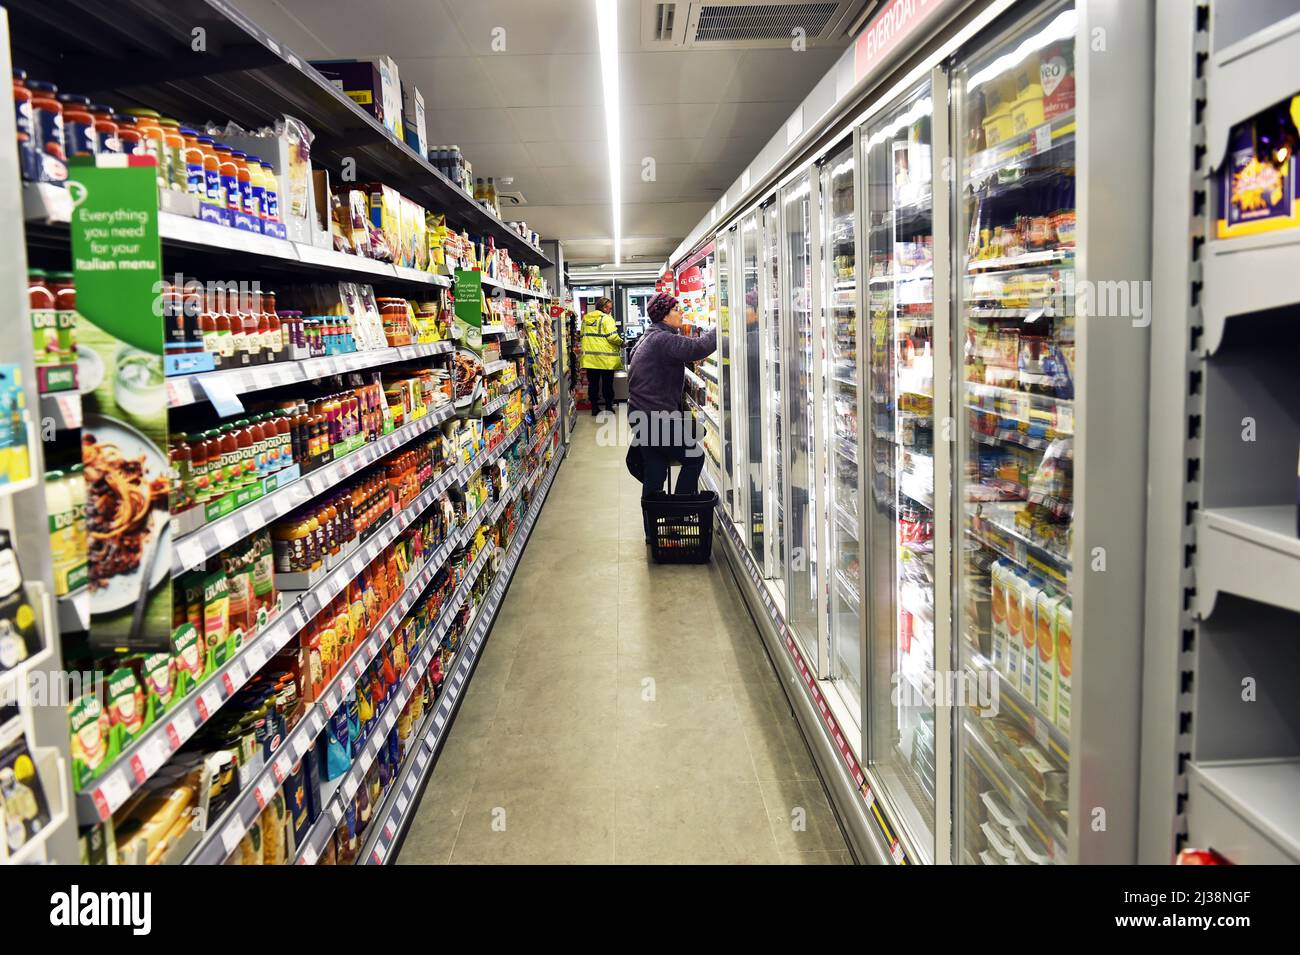 Supermarket aisle with a member of staff stocking shelves Stock Photo